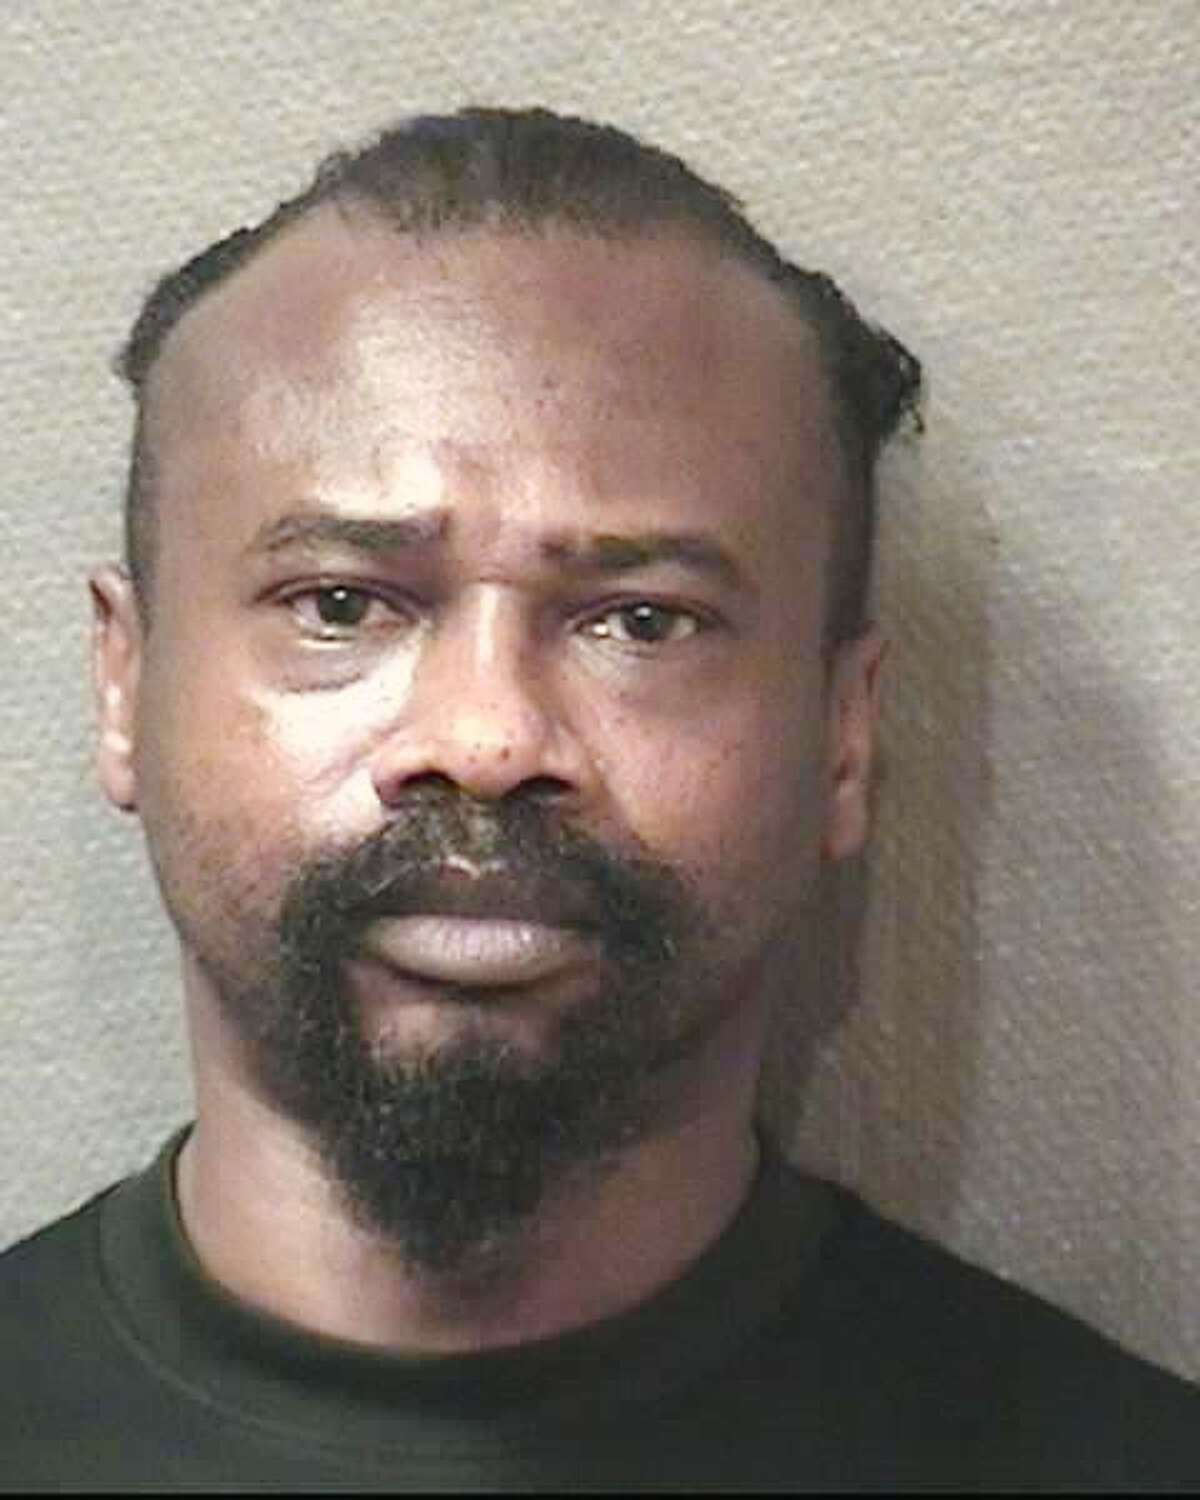 David Ray Conley III, 48, is facing capital murder charges.